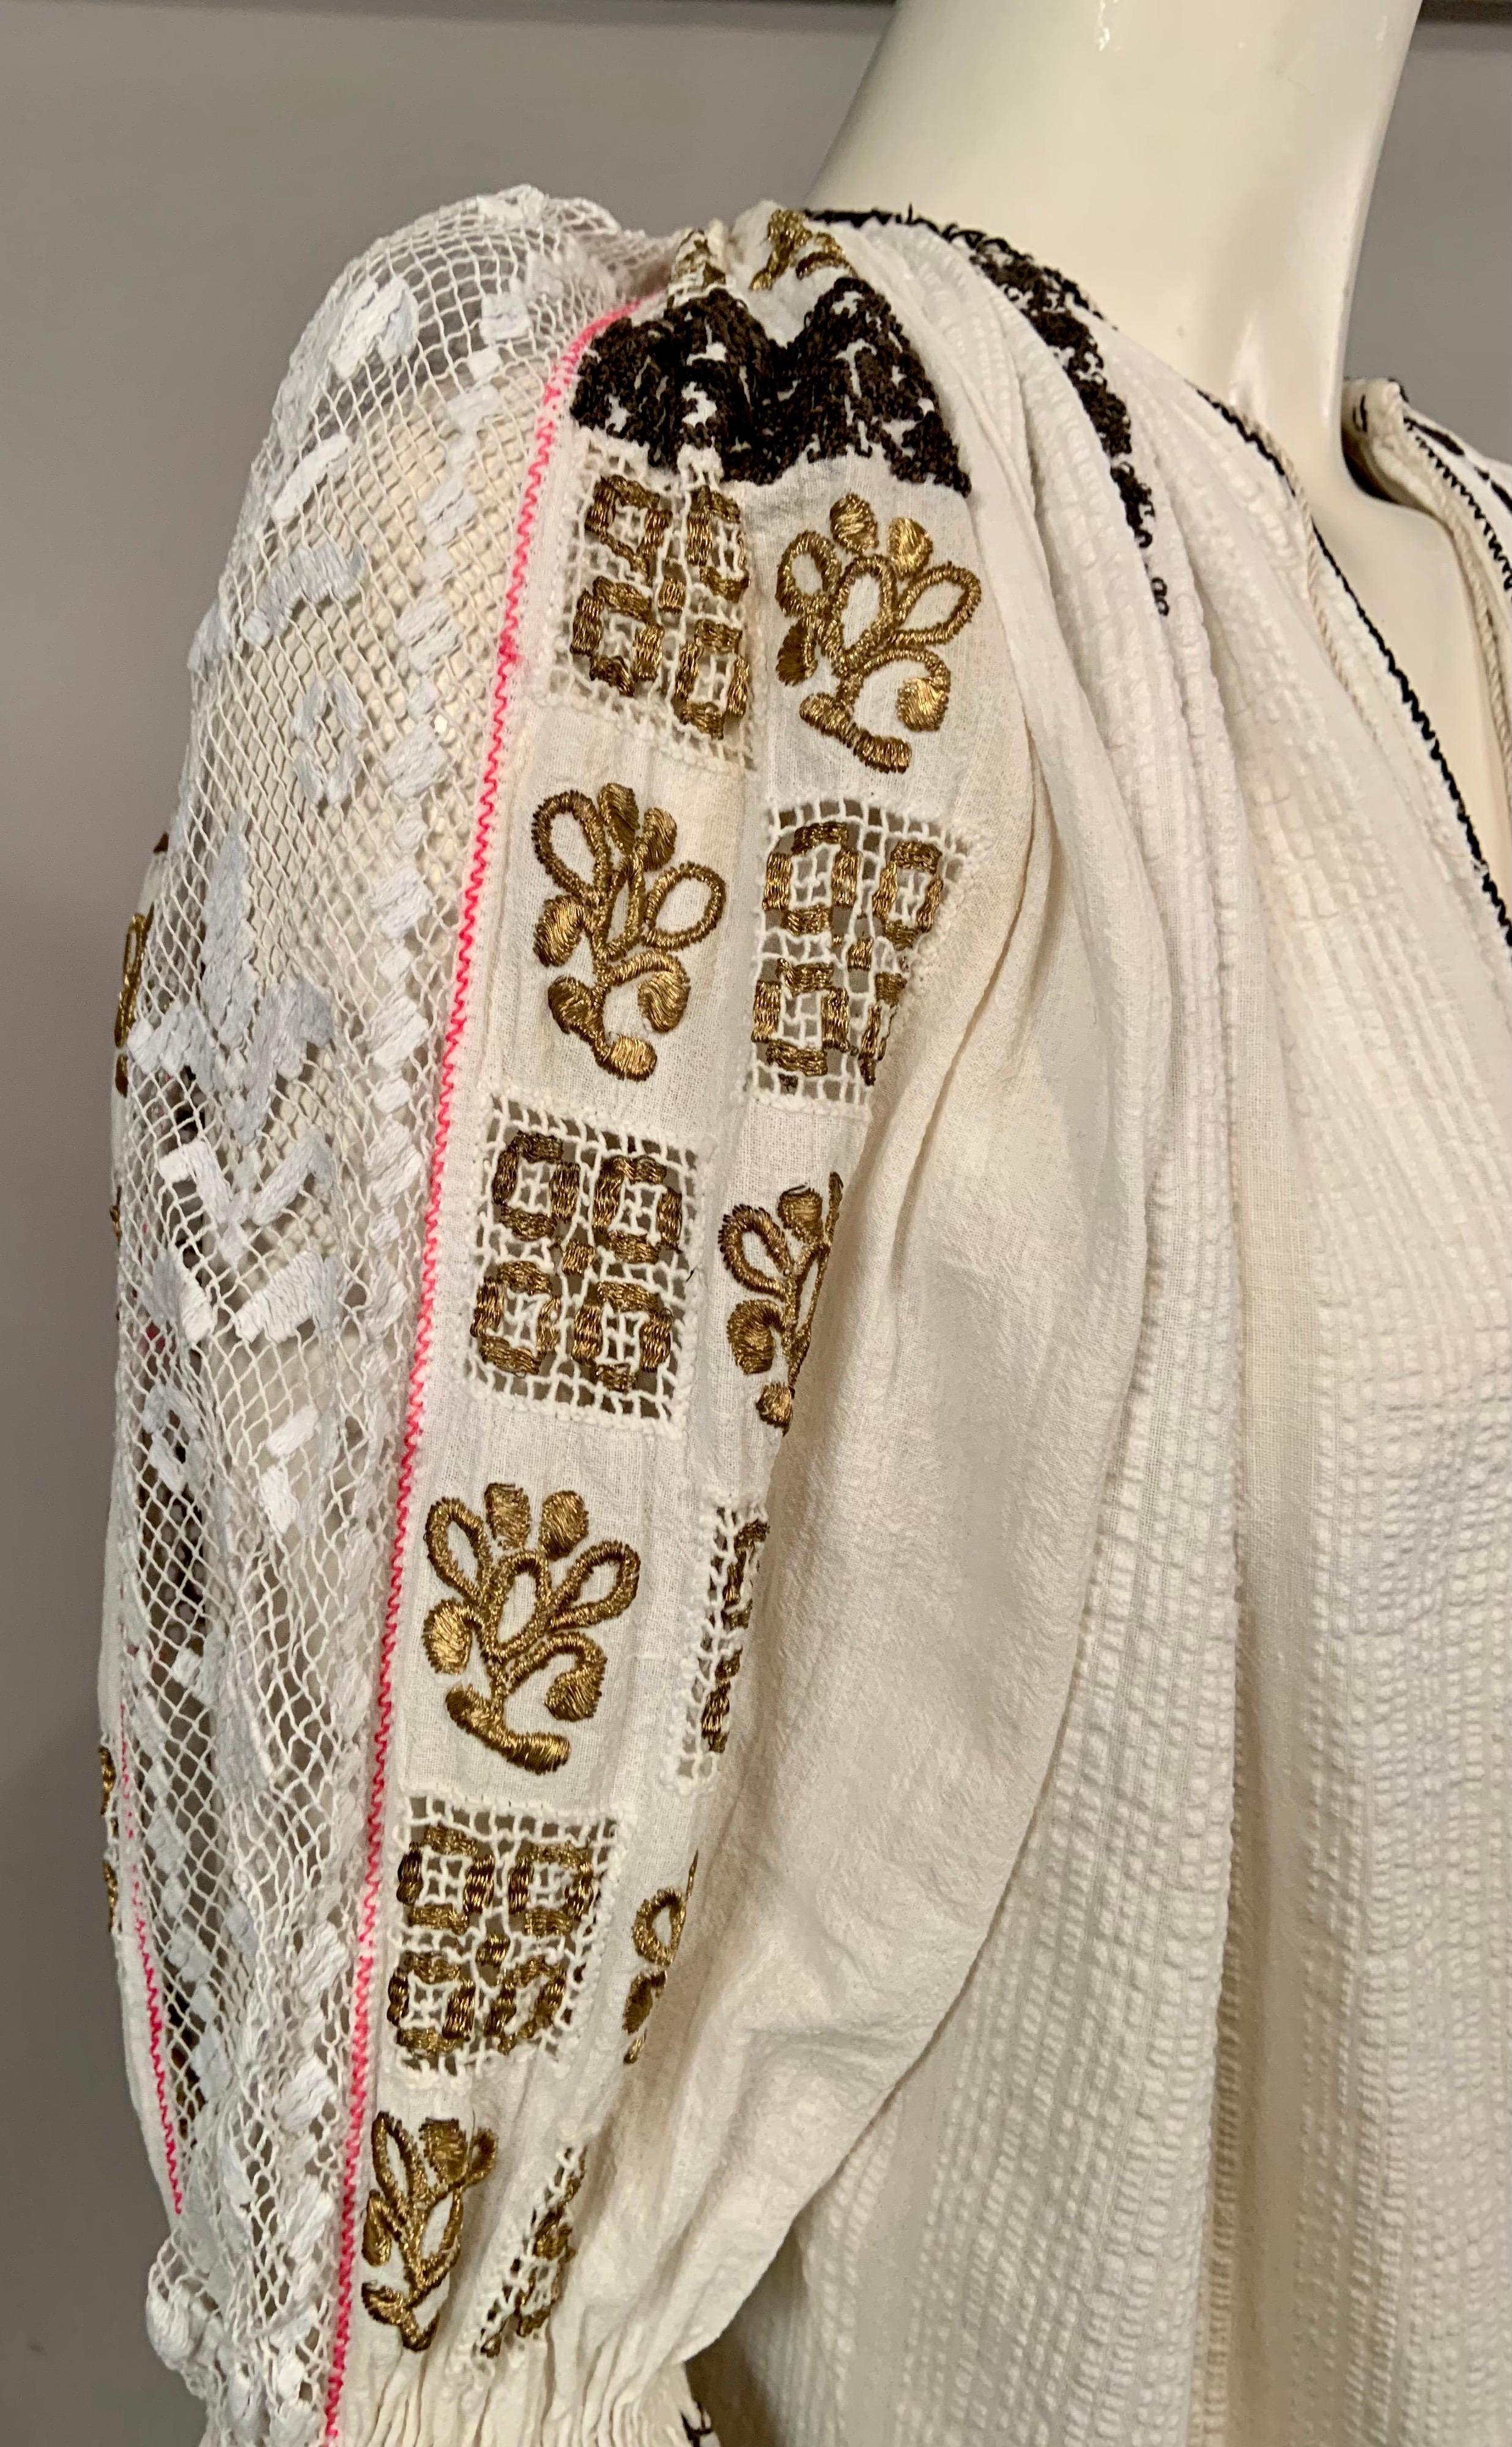 This Romanian blouse is one of the nicest that I have ever owned.  The sophisticated use of  black and metallic gold embroidery and the wide bands of lace on the sleeves and the cuffs are very interesting and beautiful. The blouse is in excellent